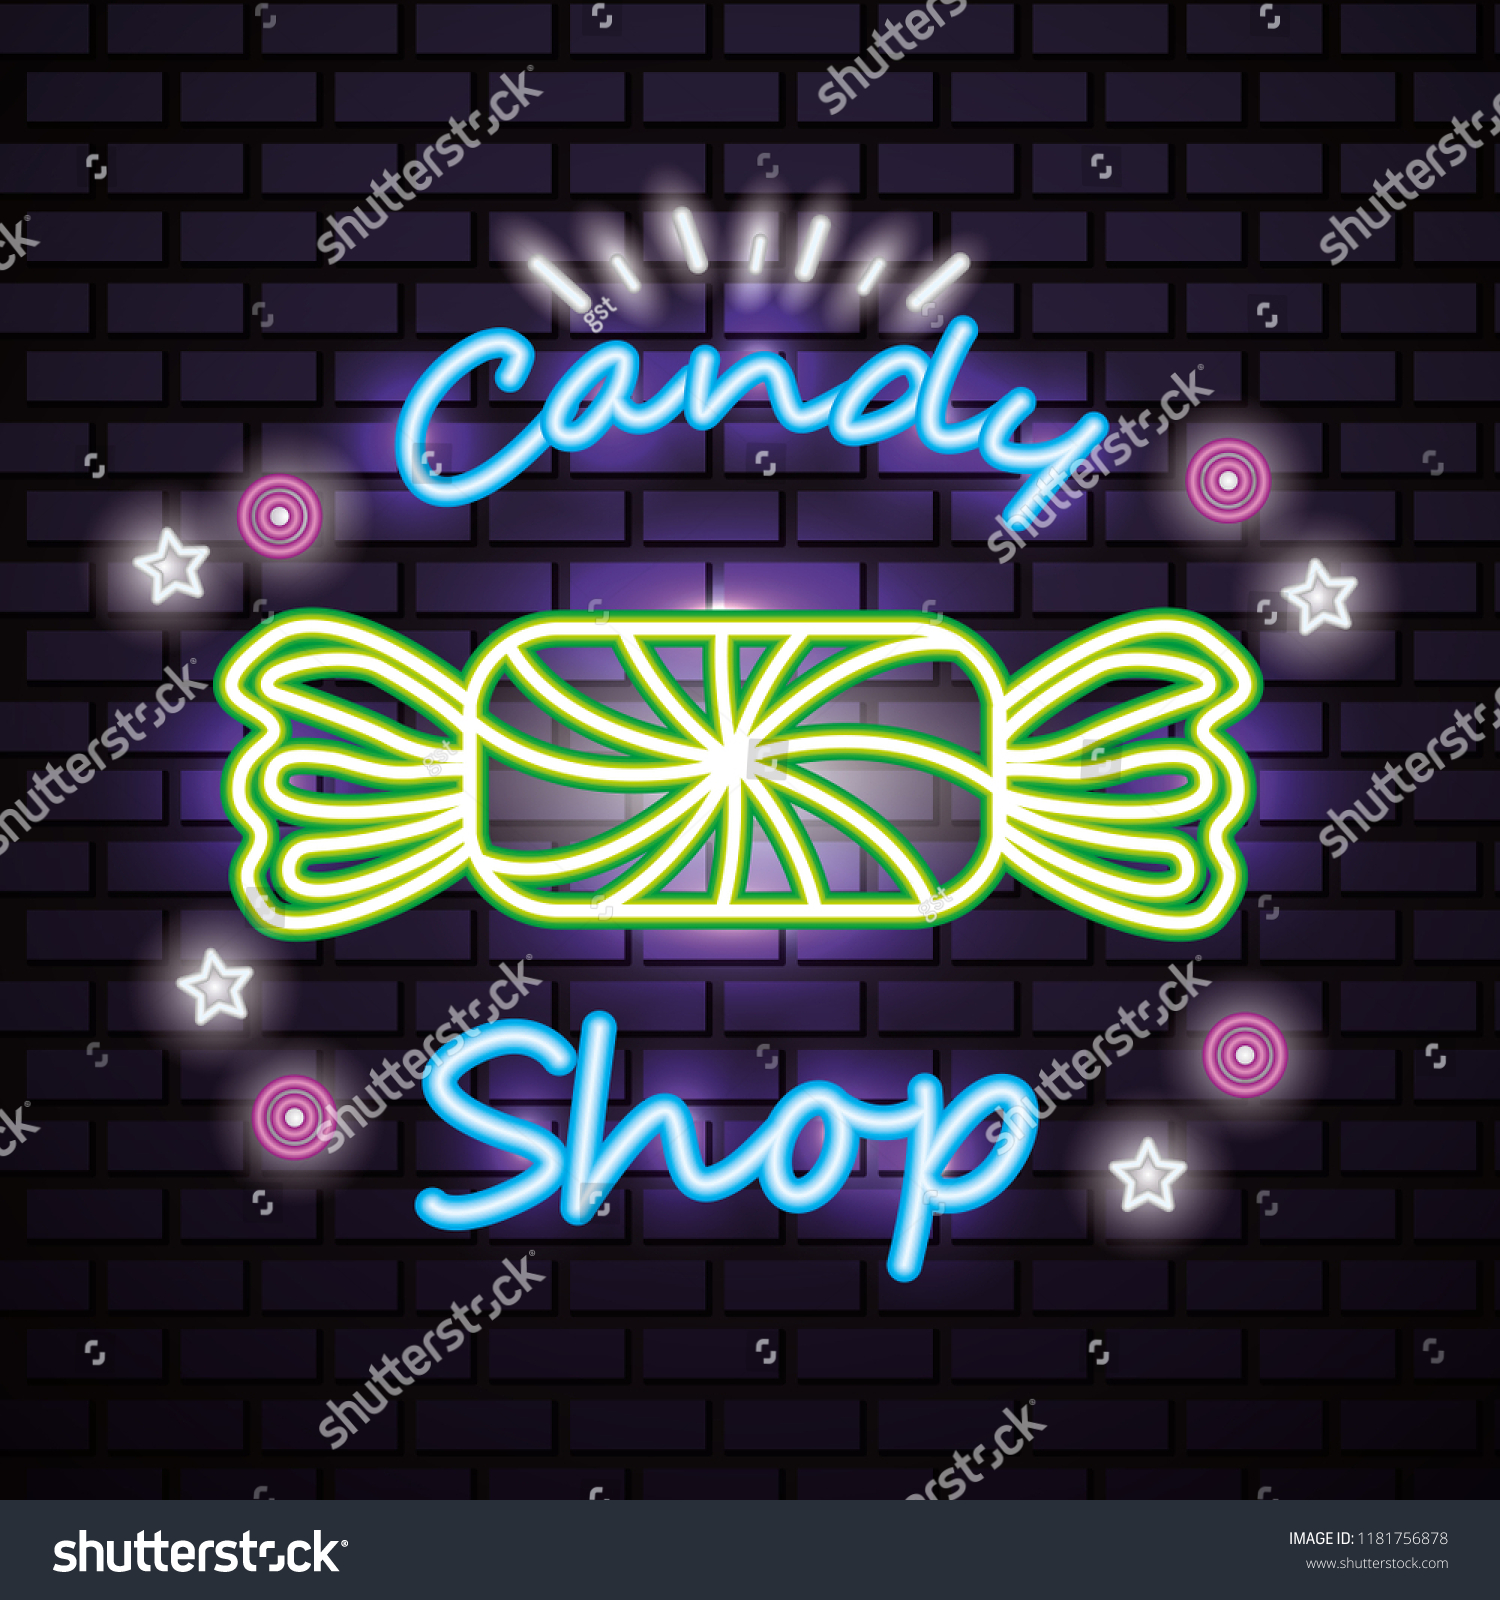 Sweet Candy Shop Neon Stock Vector Royalty Free 1181756878 Shutterstock